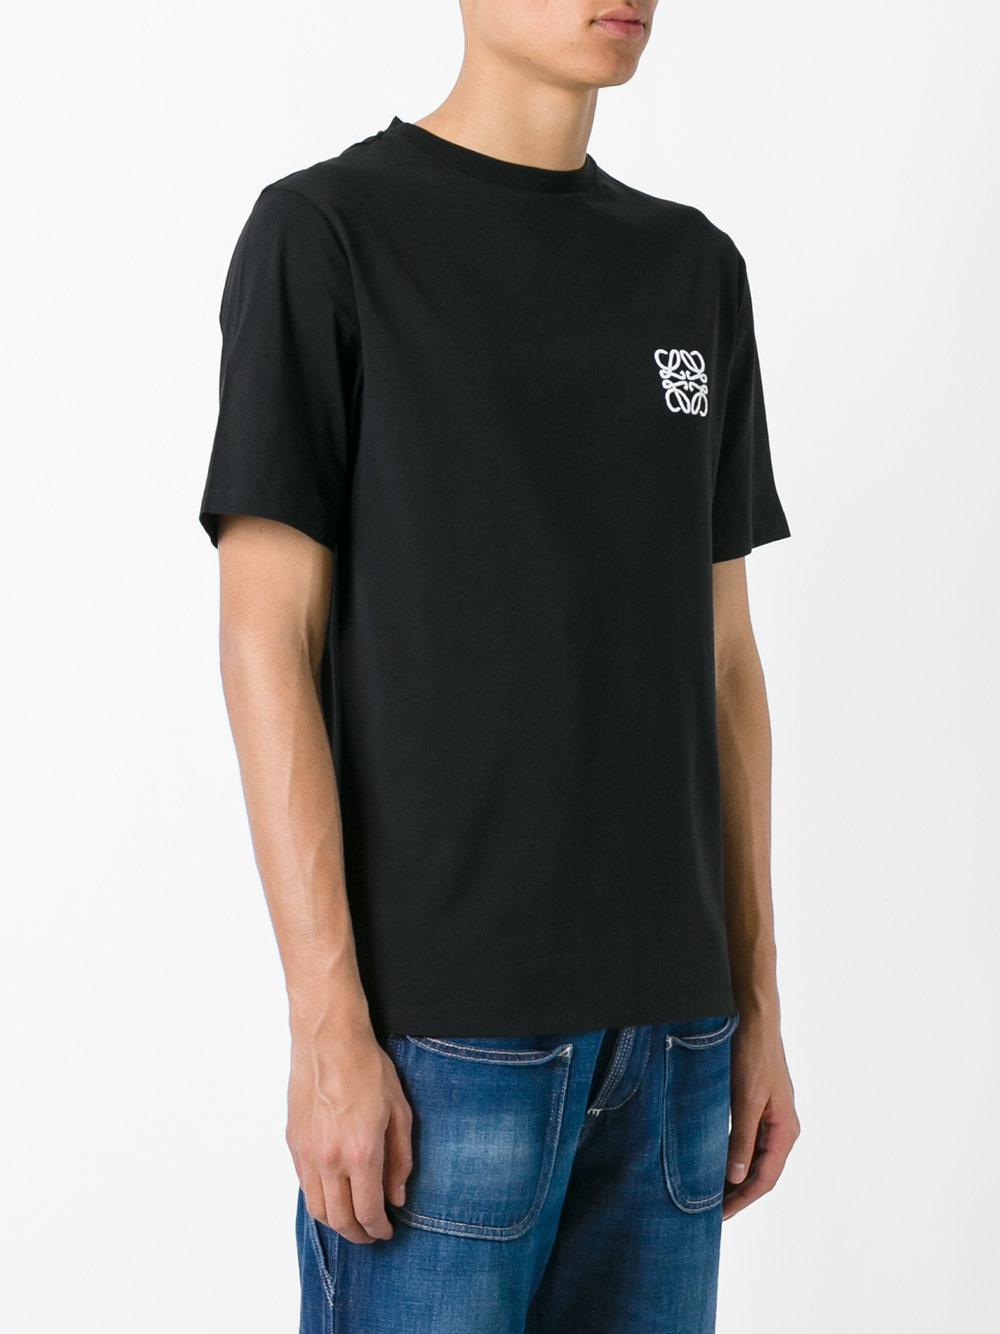 Loewe Logo Embroidered T-shirt in Black for Men - Lyst